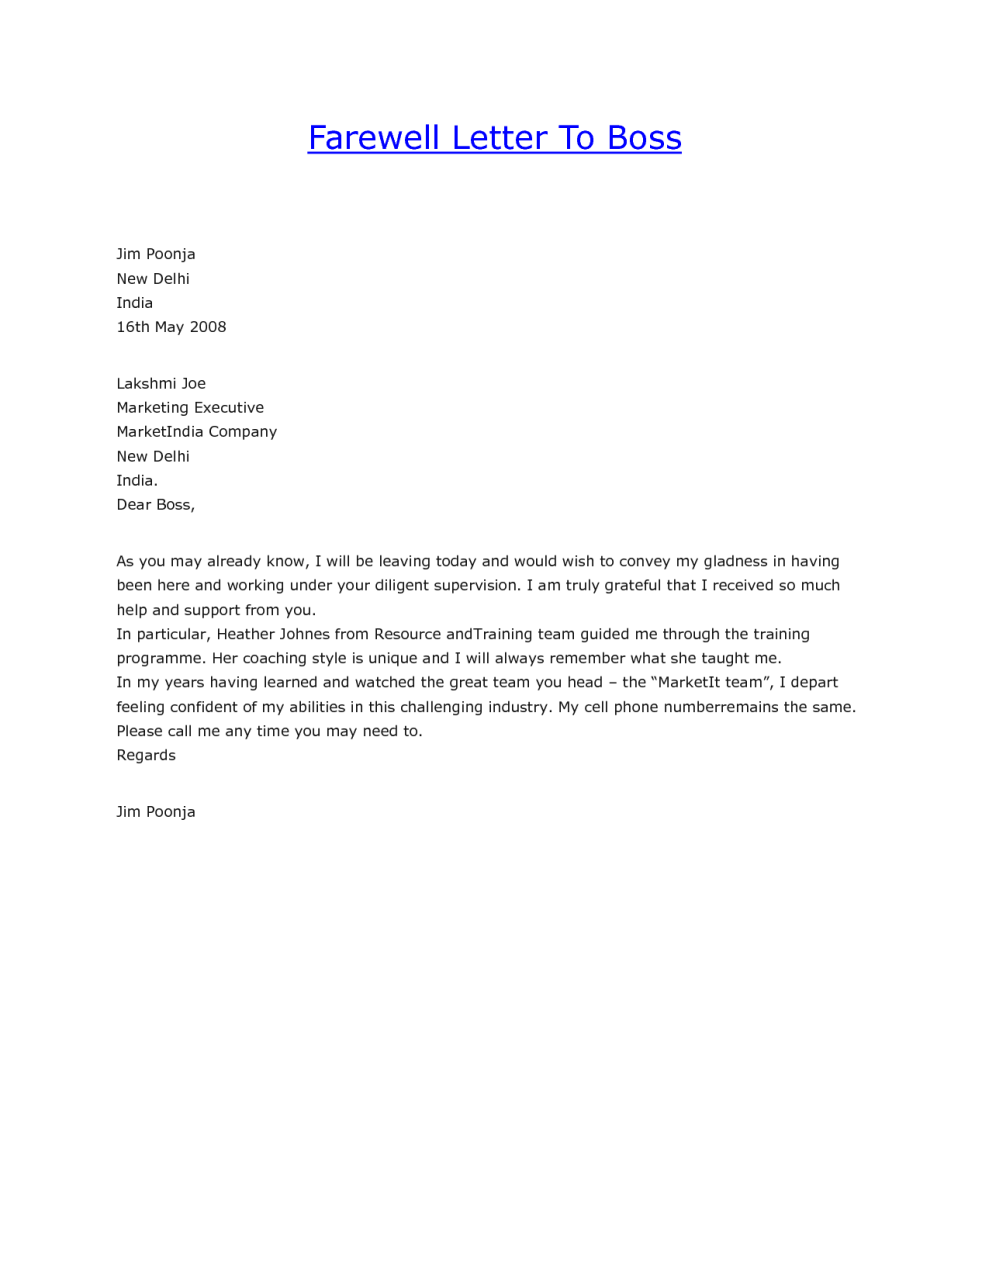 Goodbye Letter to Boss Sample Message to write in Goodbye Letter To